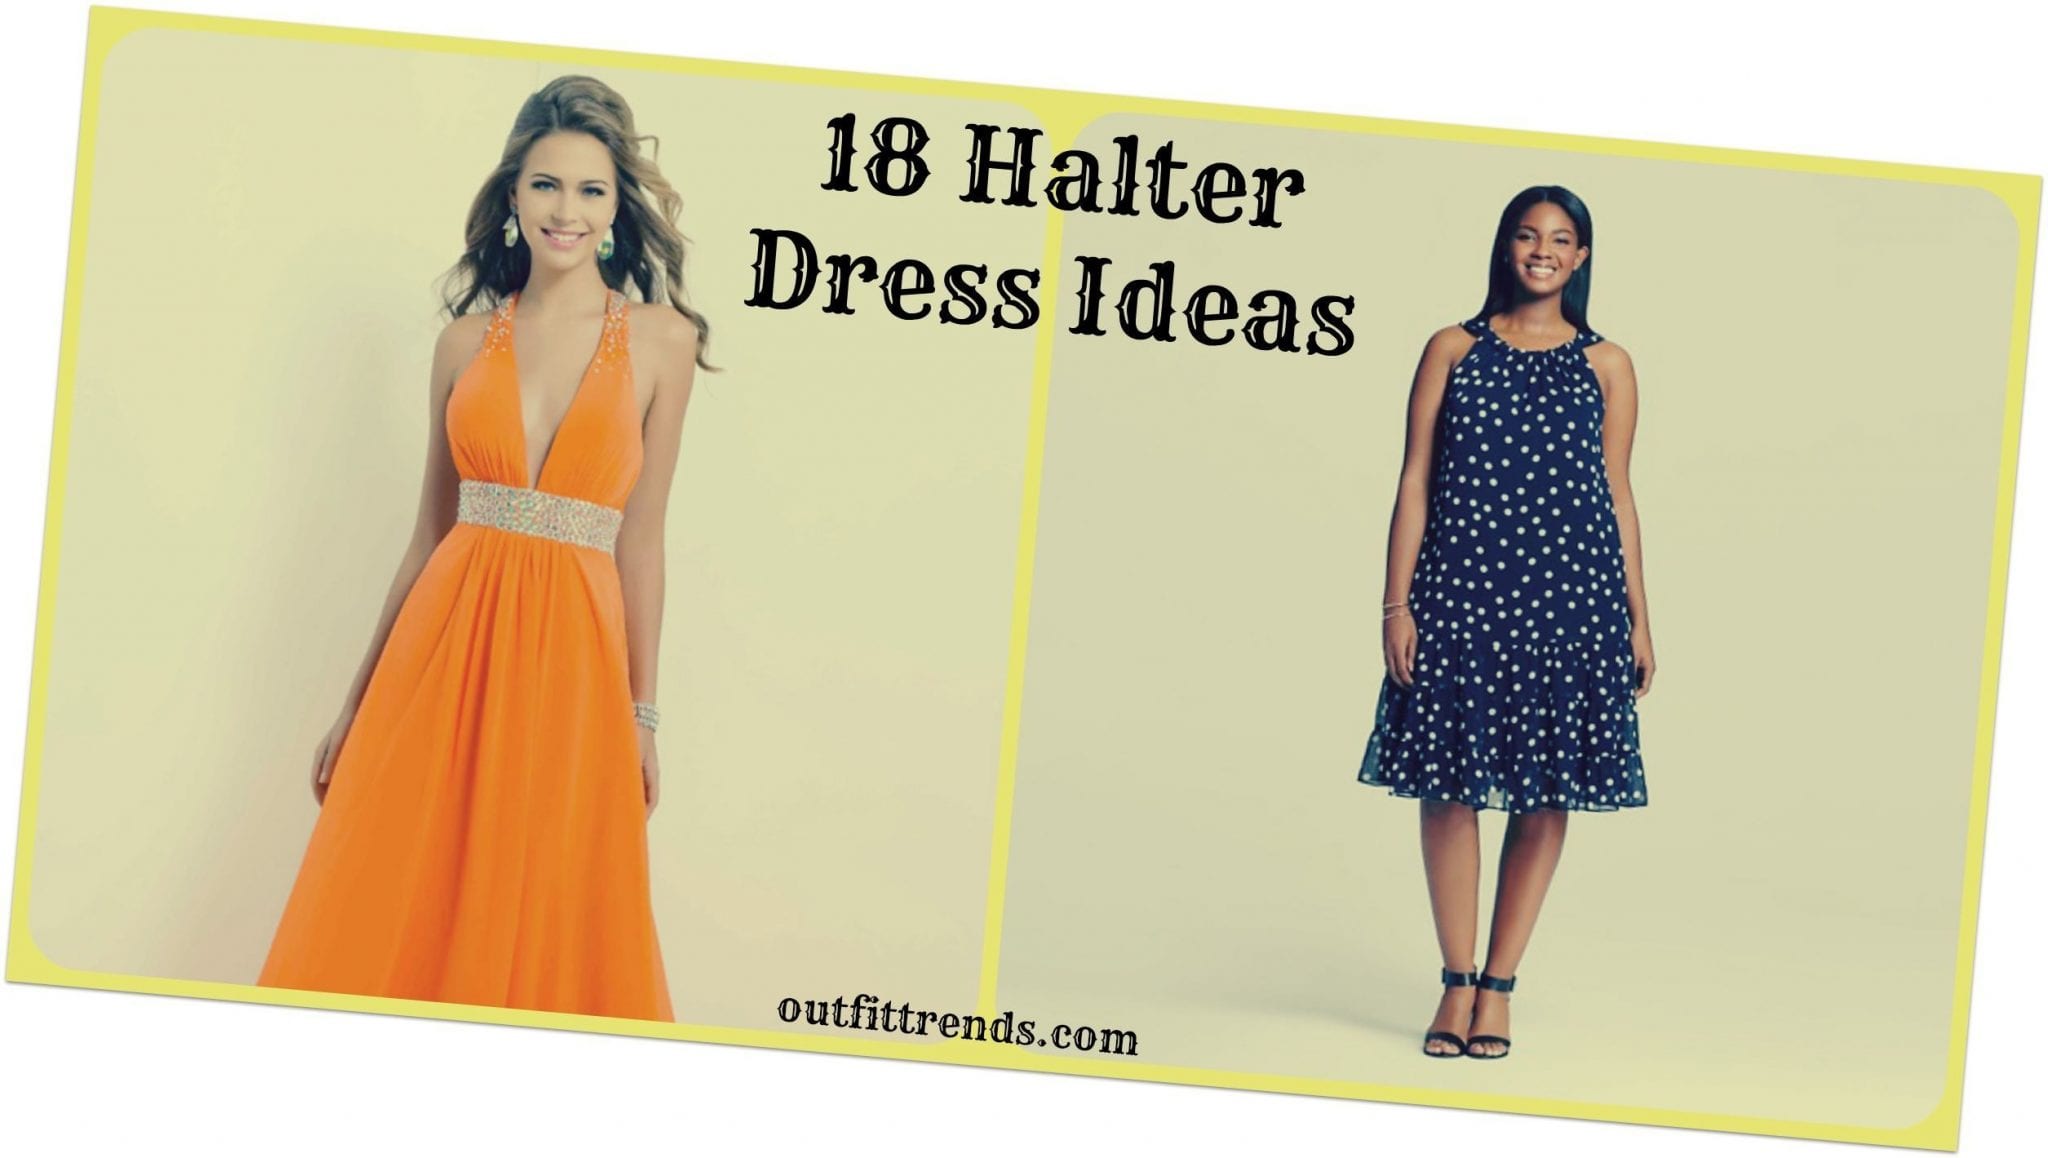 Cute Halter Dresses – 18 Ways to Wear Halter Outfits Everyday